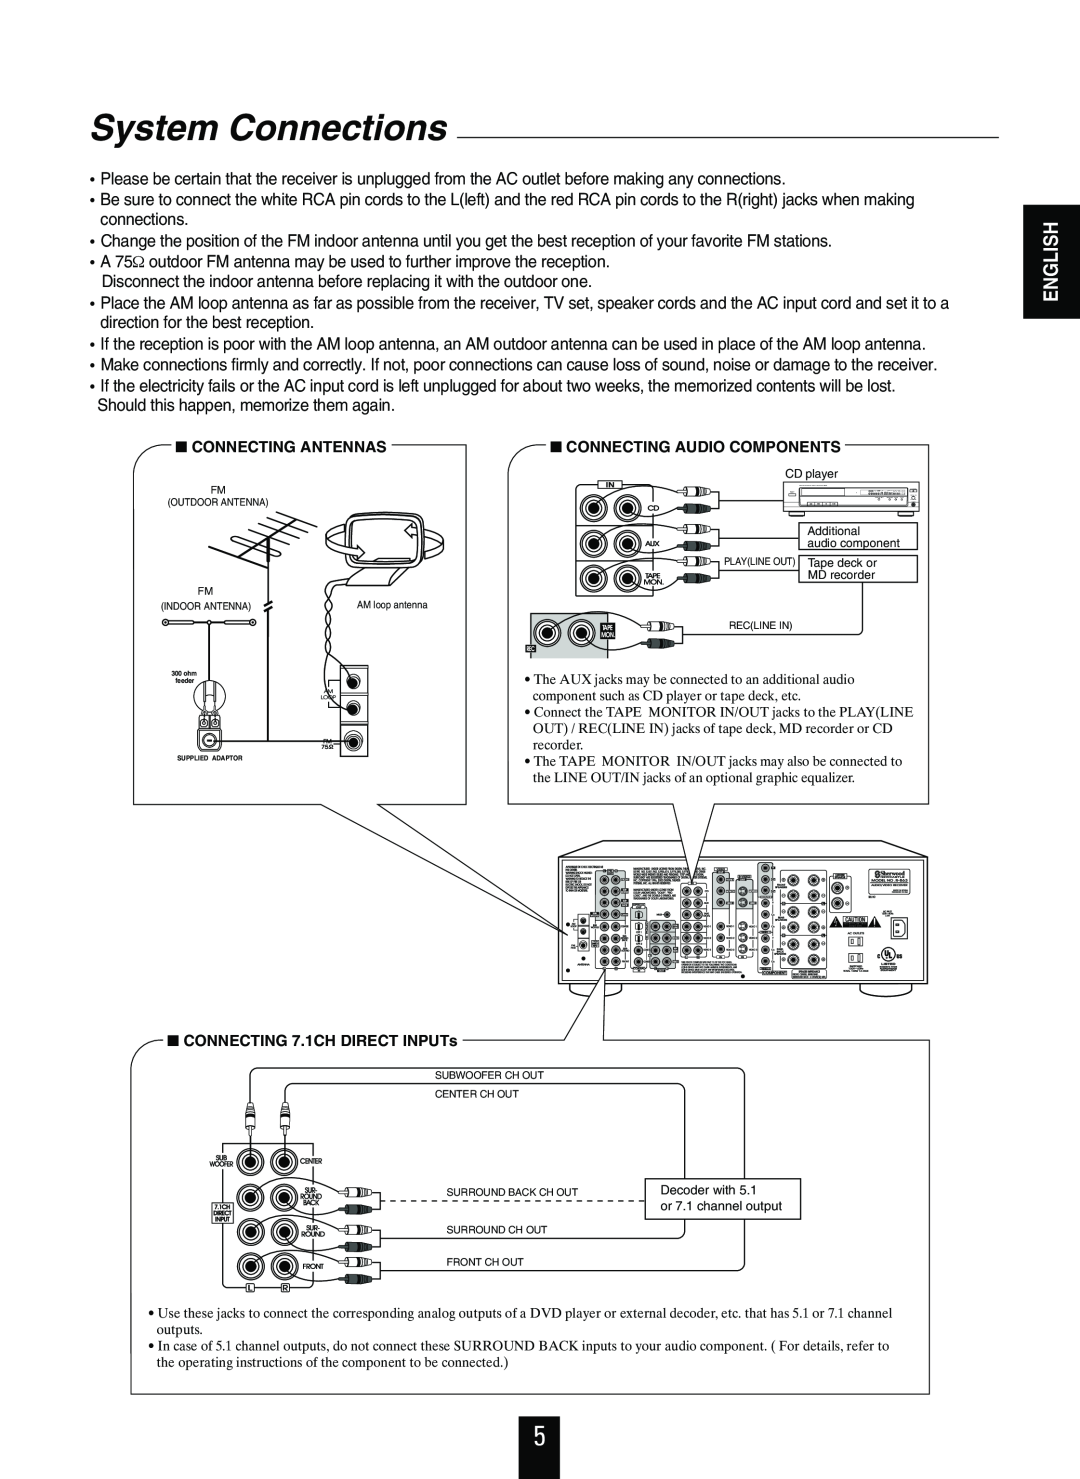 Sherwood R-863 manual System Connections, English, Connecting Antennas, Connecting Audio Components 